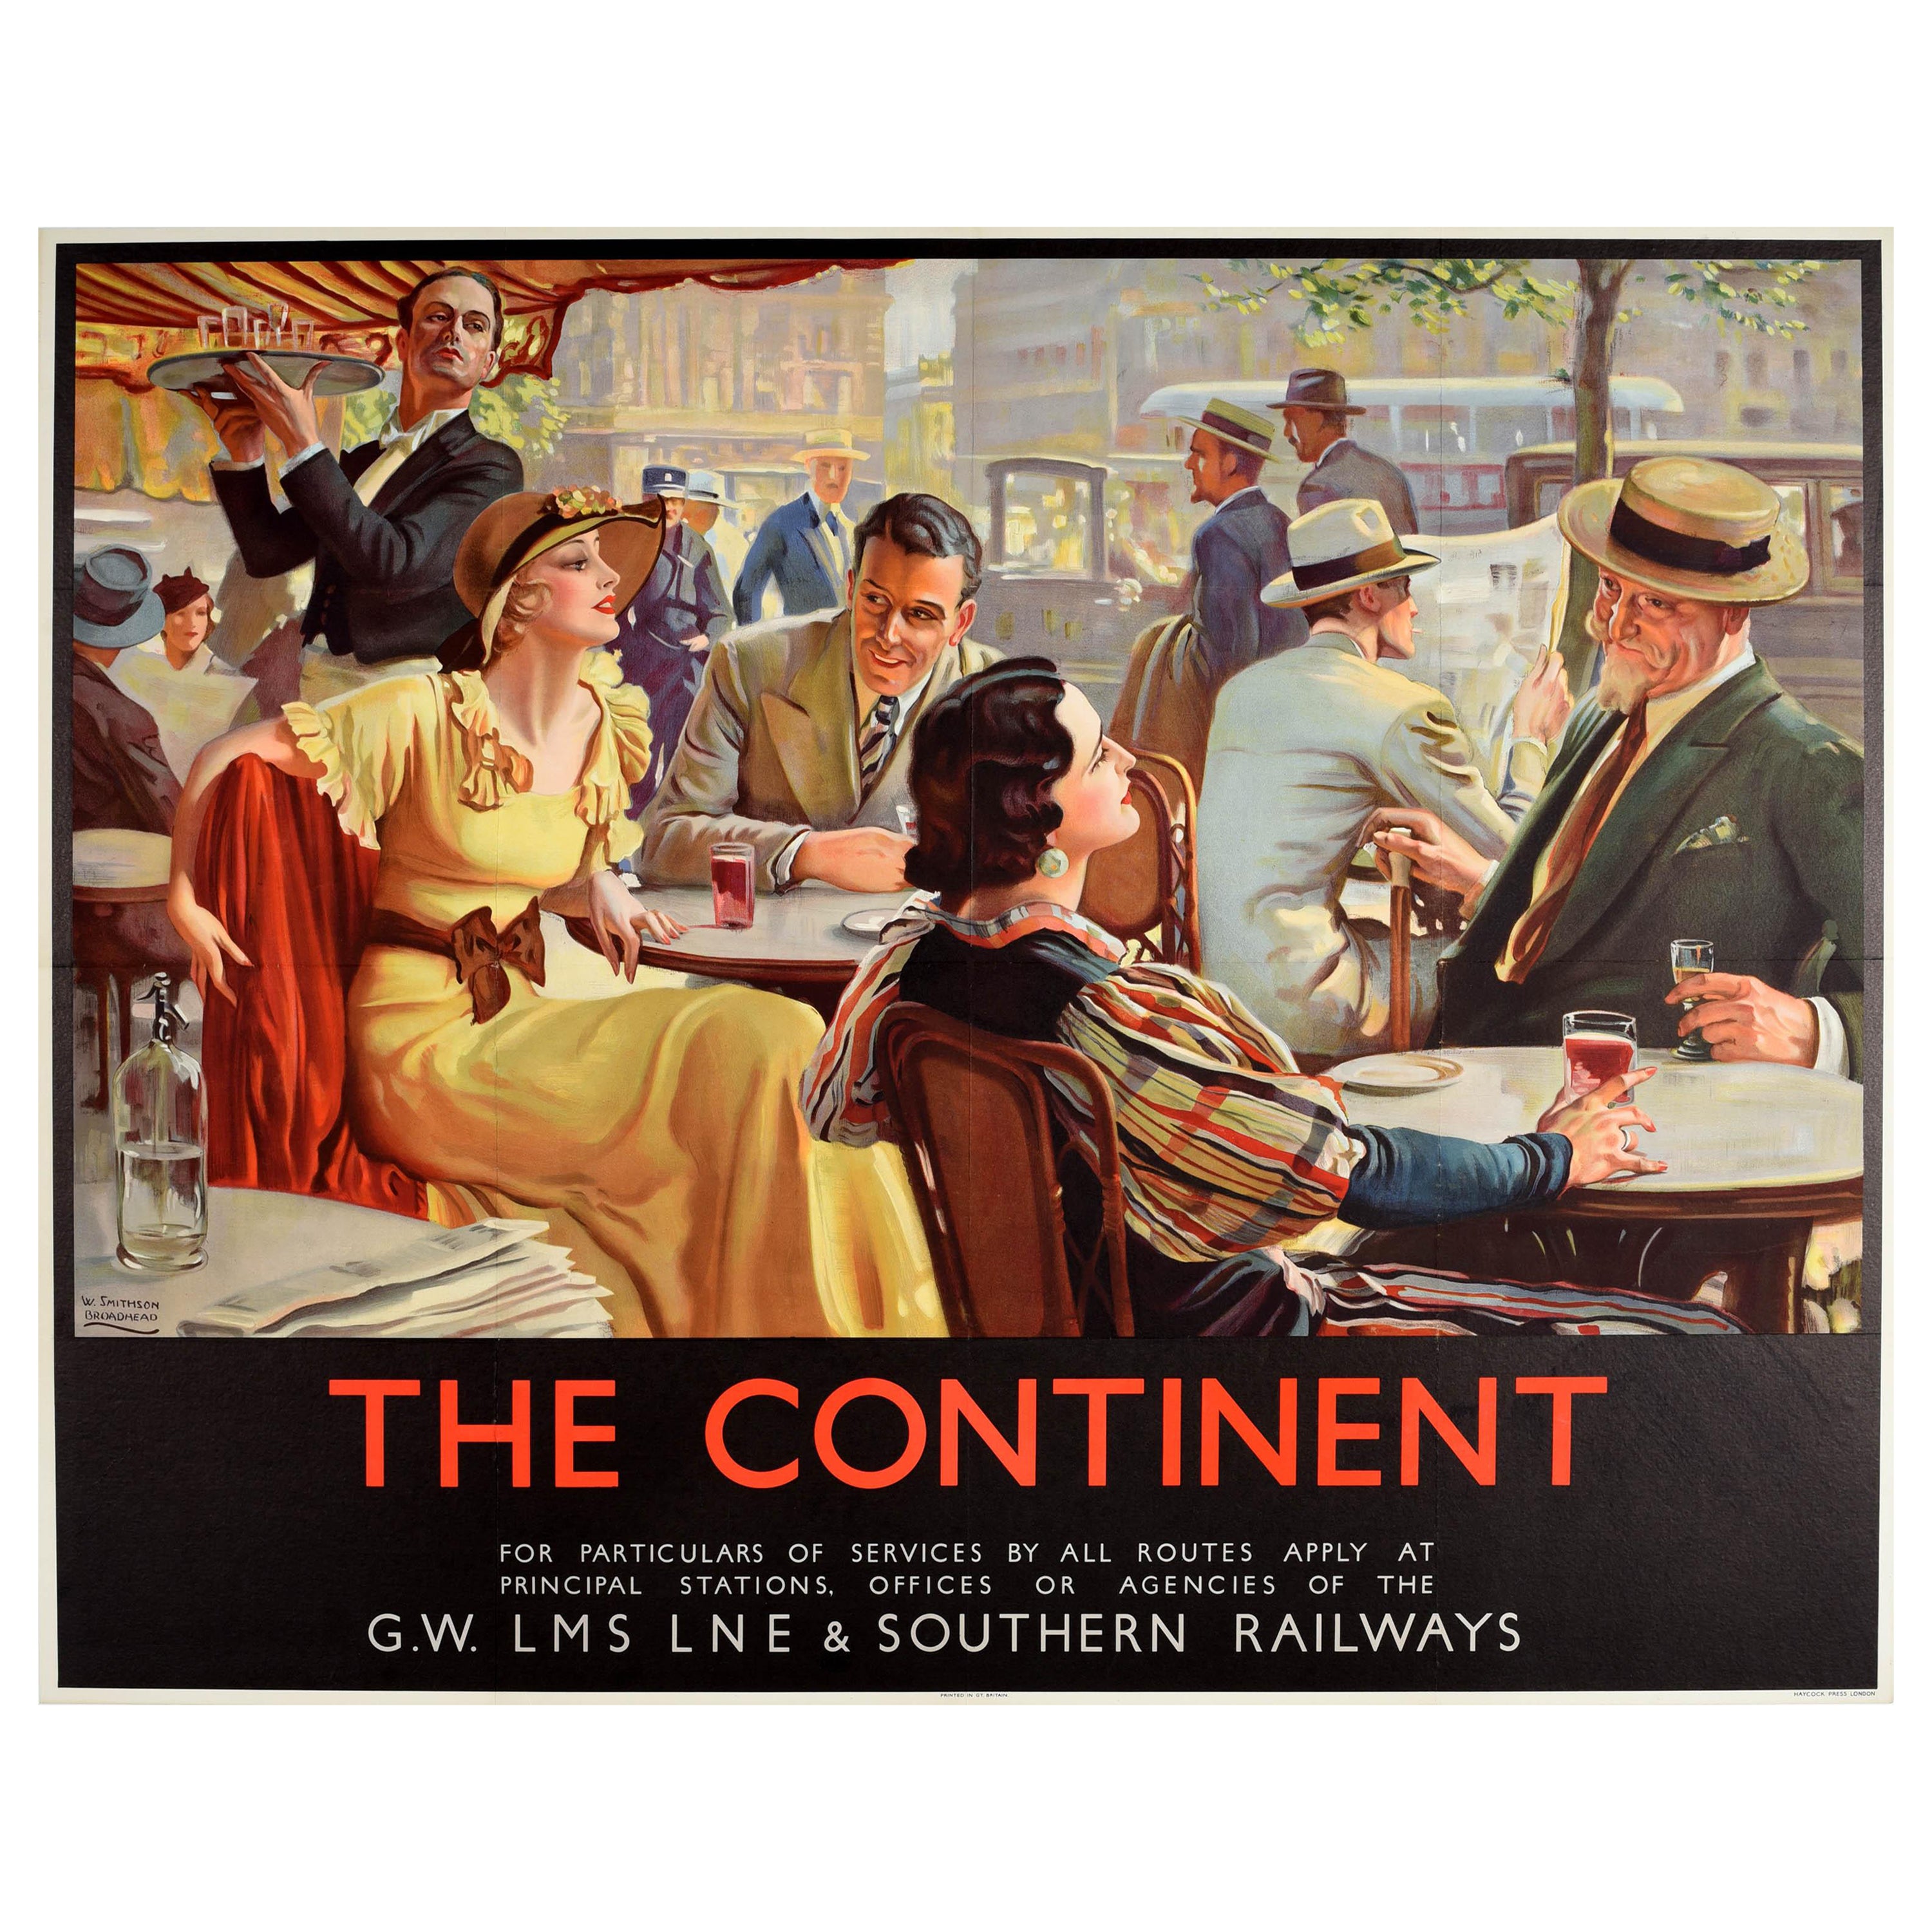 Original Vintage Travel Poster The Continent LMS Southern Railways Art Deco GWR